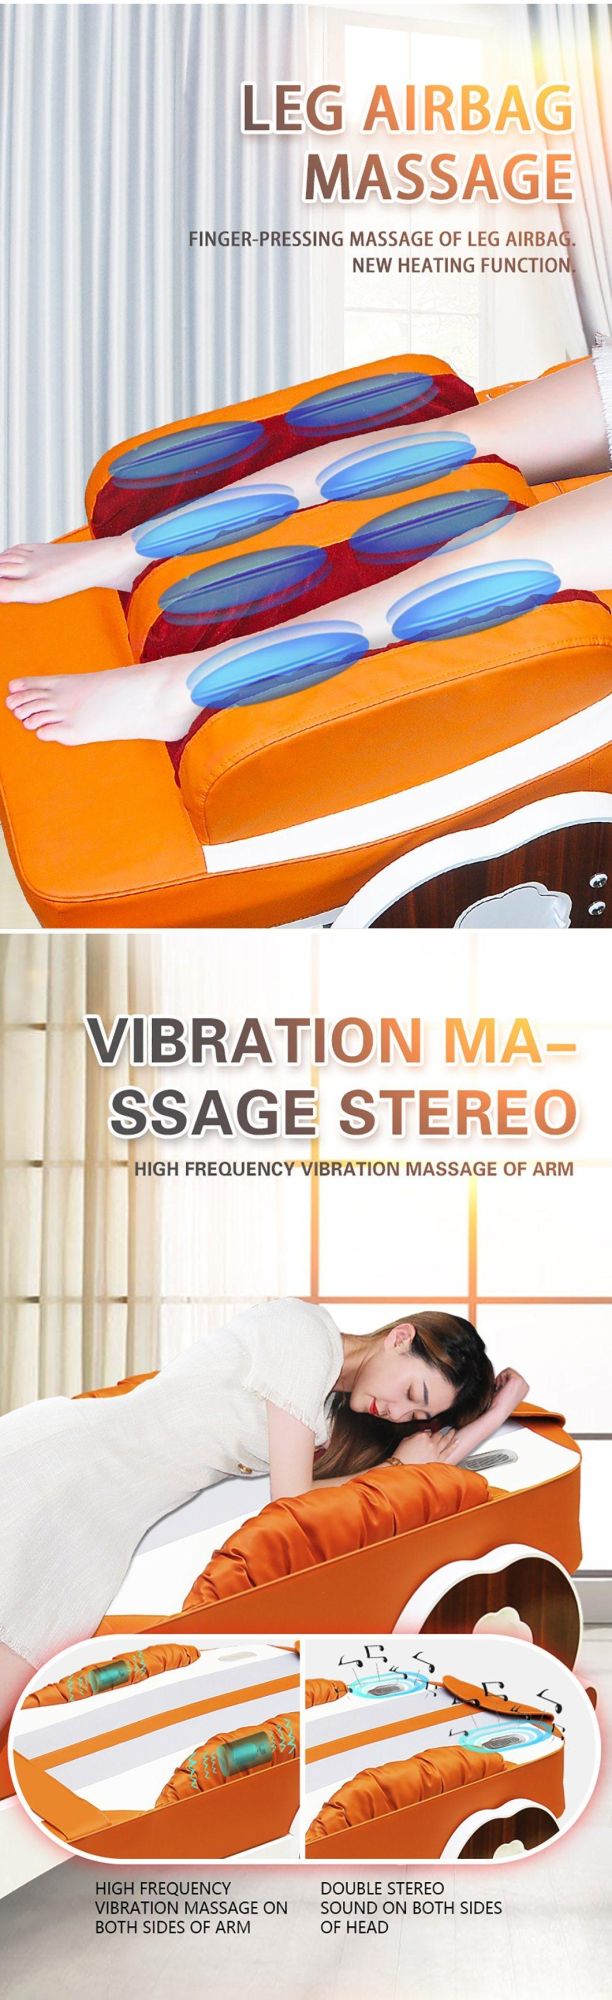 Health Portable Massage Bed Electric Jade Stone Rolling Spine Relax Therapeutic Chiropractic Heating Massage Bed